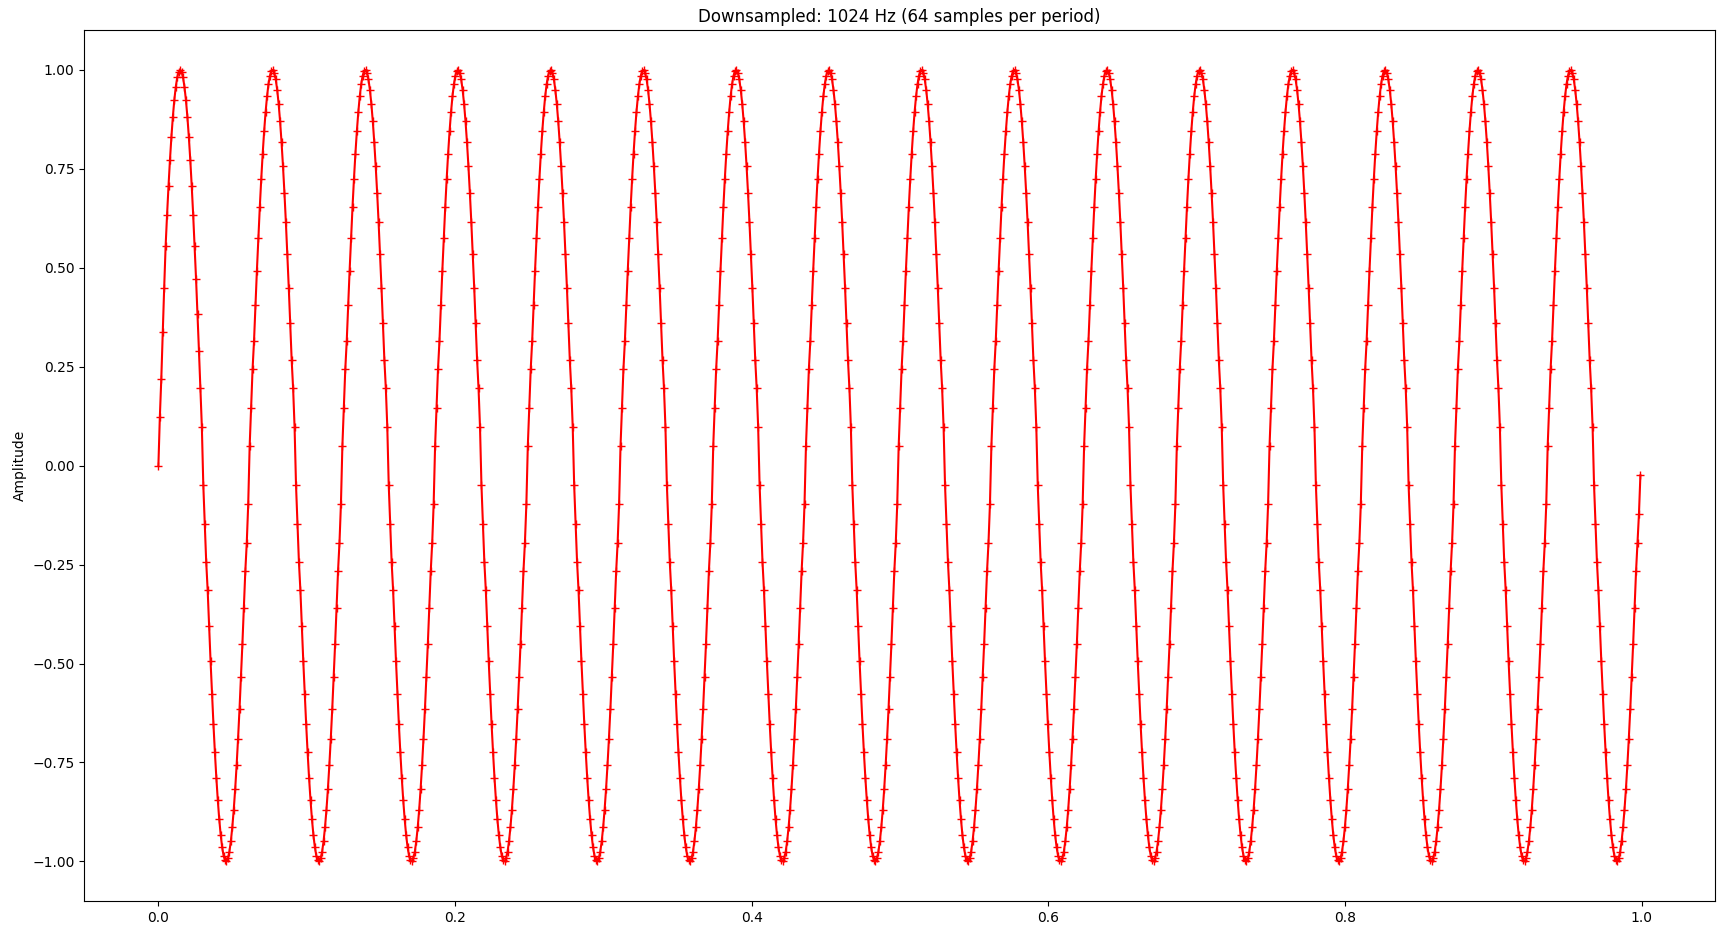 A sine wave with 16 Hz consisting of 4096 samples downsampled to 1024 samples